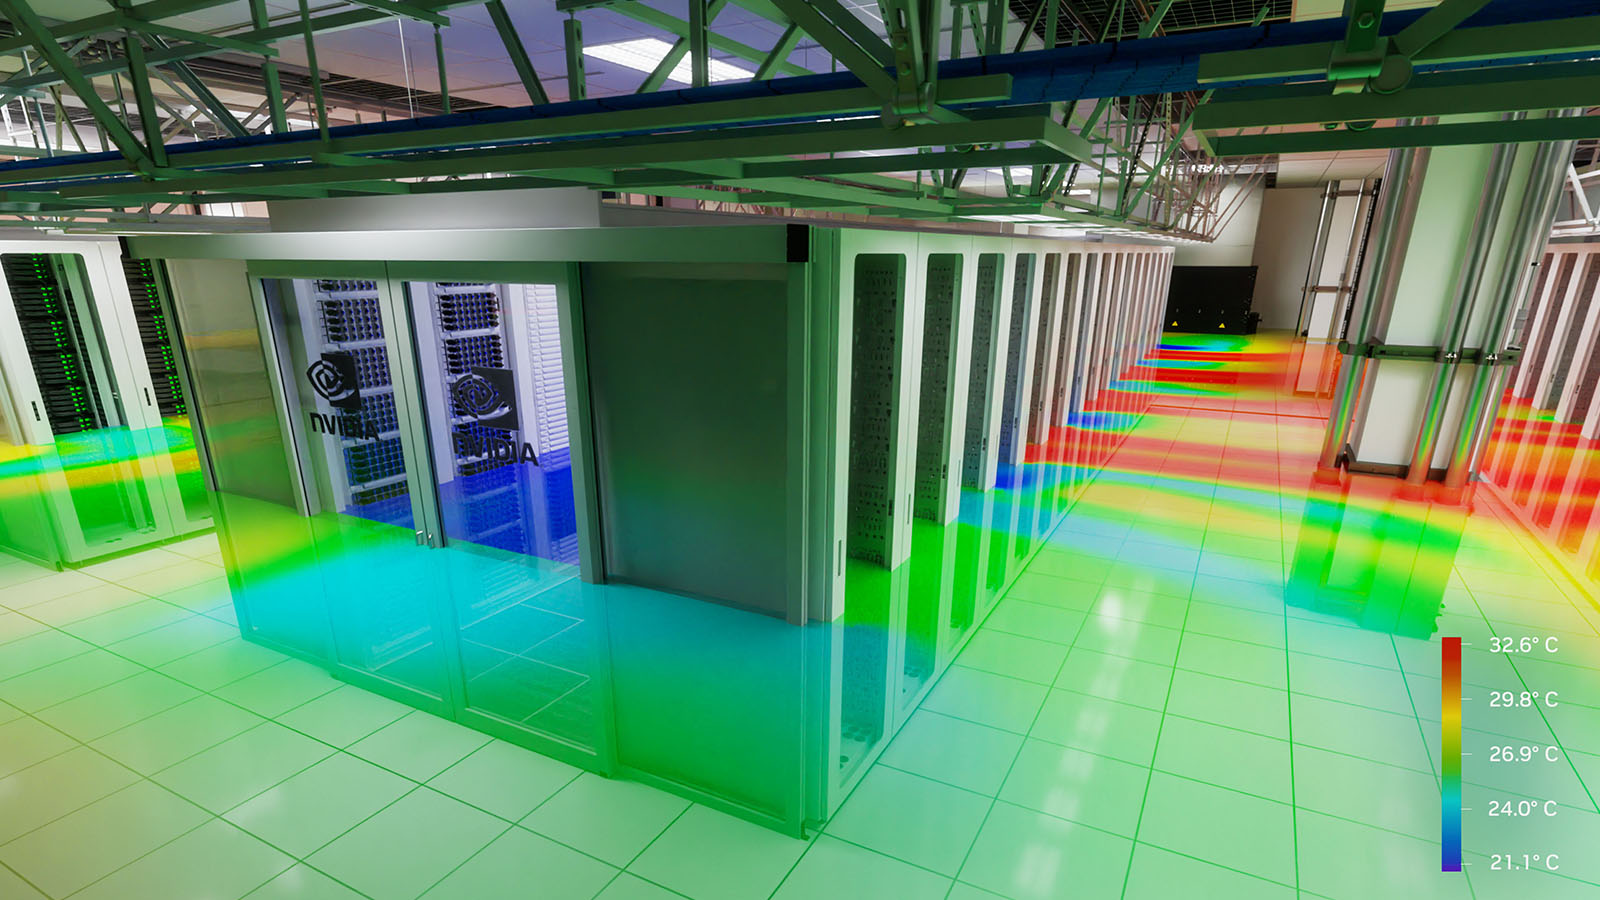 Illustration of a server room with an overlay of colors representing different temperatures.